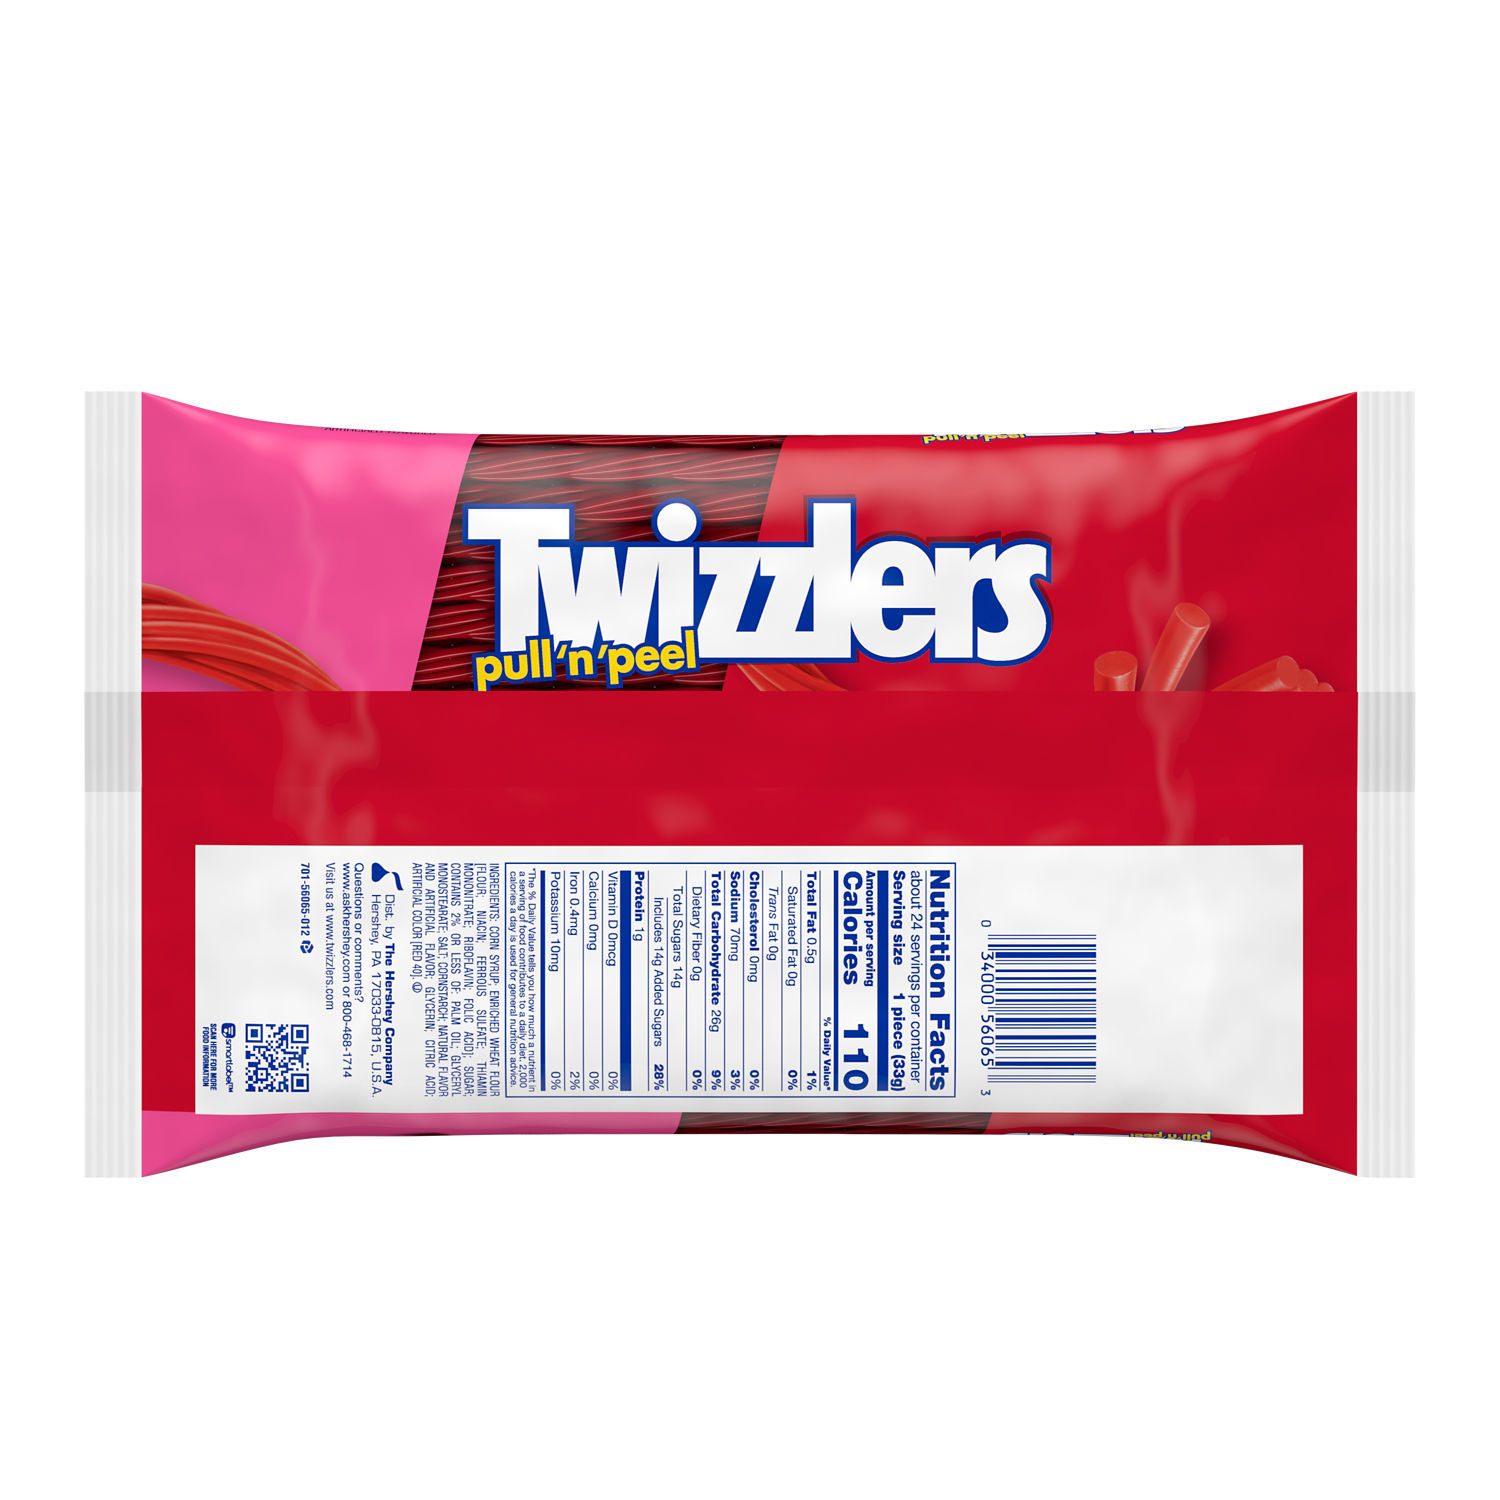 Twizzlers Pull 'N' Peel Cherry Flavored Licorice Style Low Fat Candy, Big Bag 28 oz - image 3 of 9